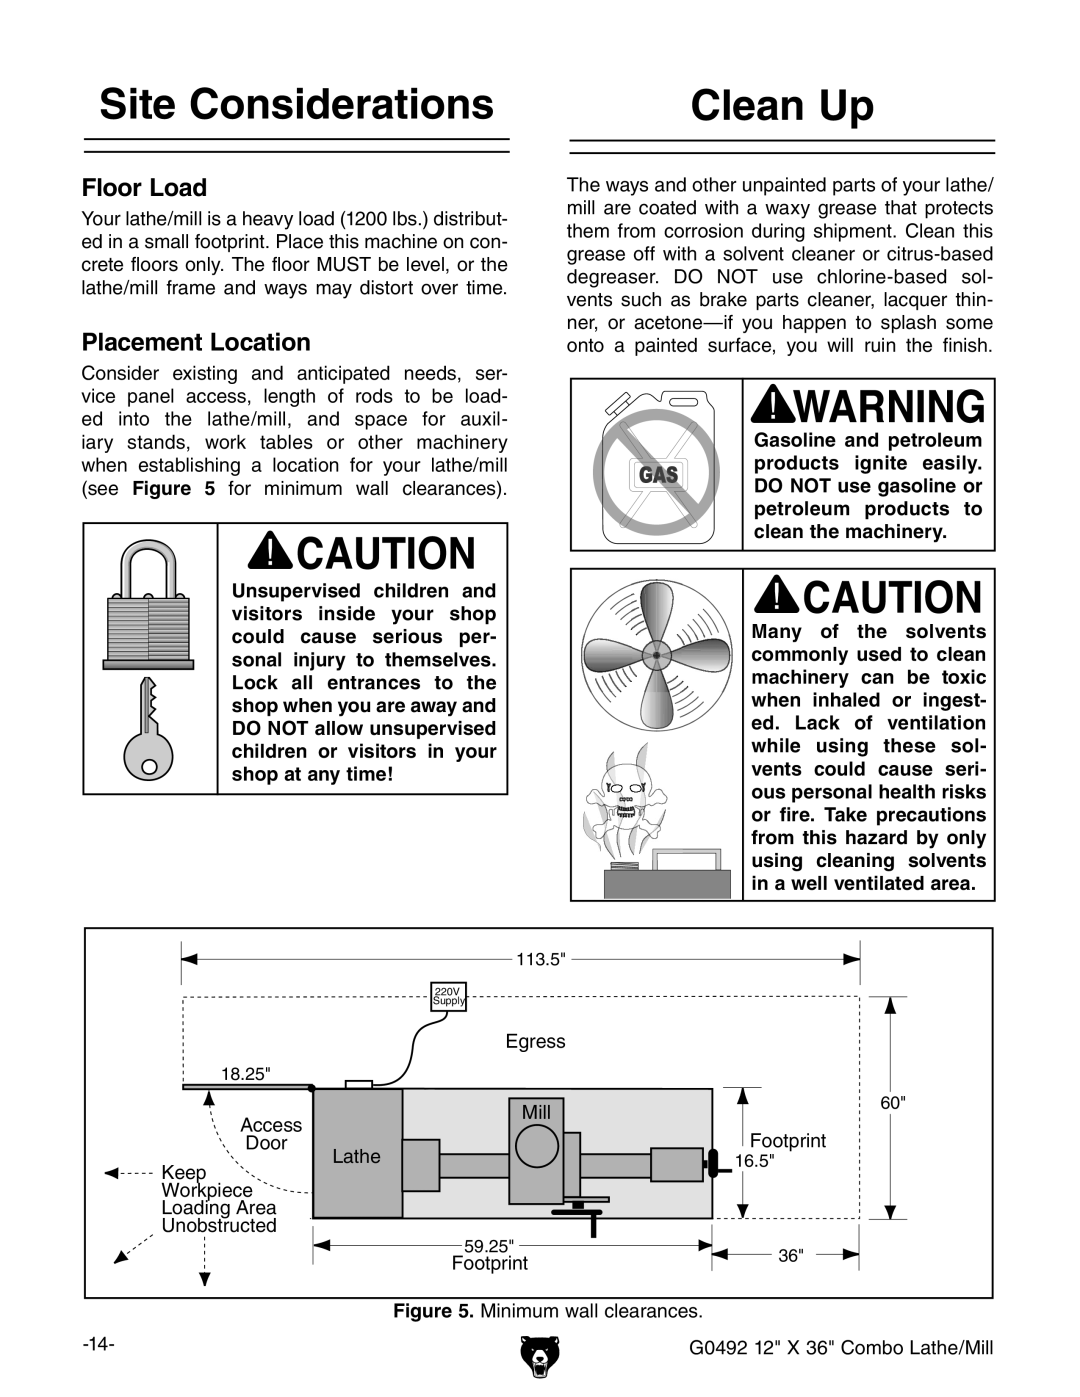 Grizzly G0492 owner manual Site Considerations, Clean Up, Floor Load, Placement Location 